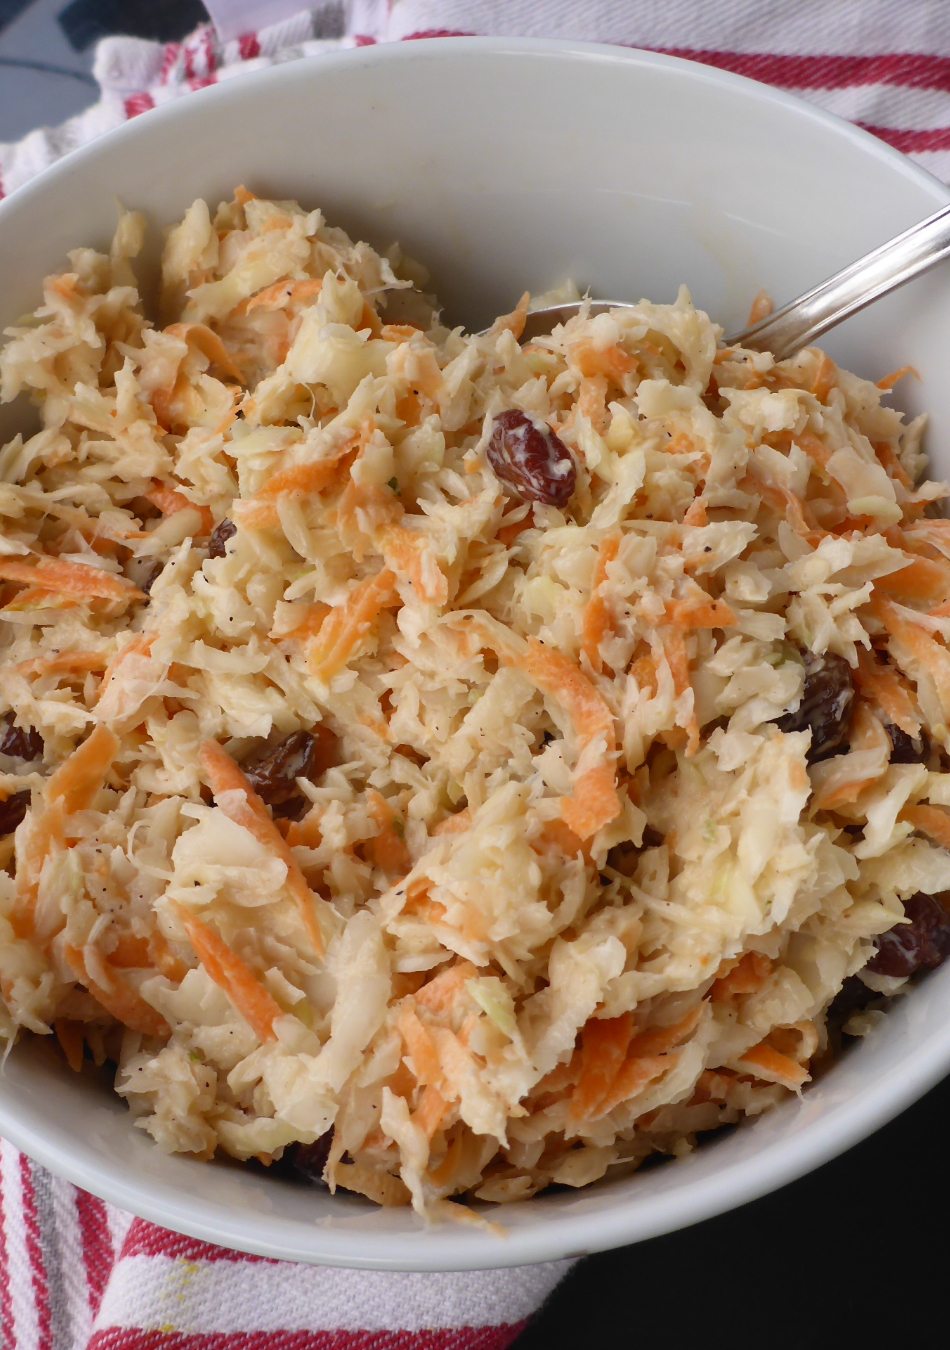 A vibrant bowl of freshly made Namibian-style coleslaw salad, featuring crisp cabbage, grated carrots, plump raisins, and a creamy dressing, creating a colorful and appetizing dish.